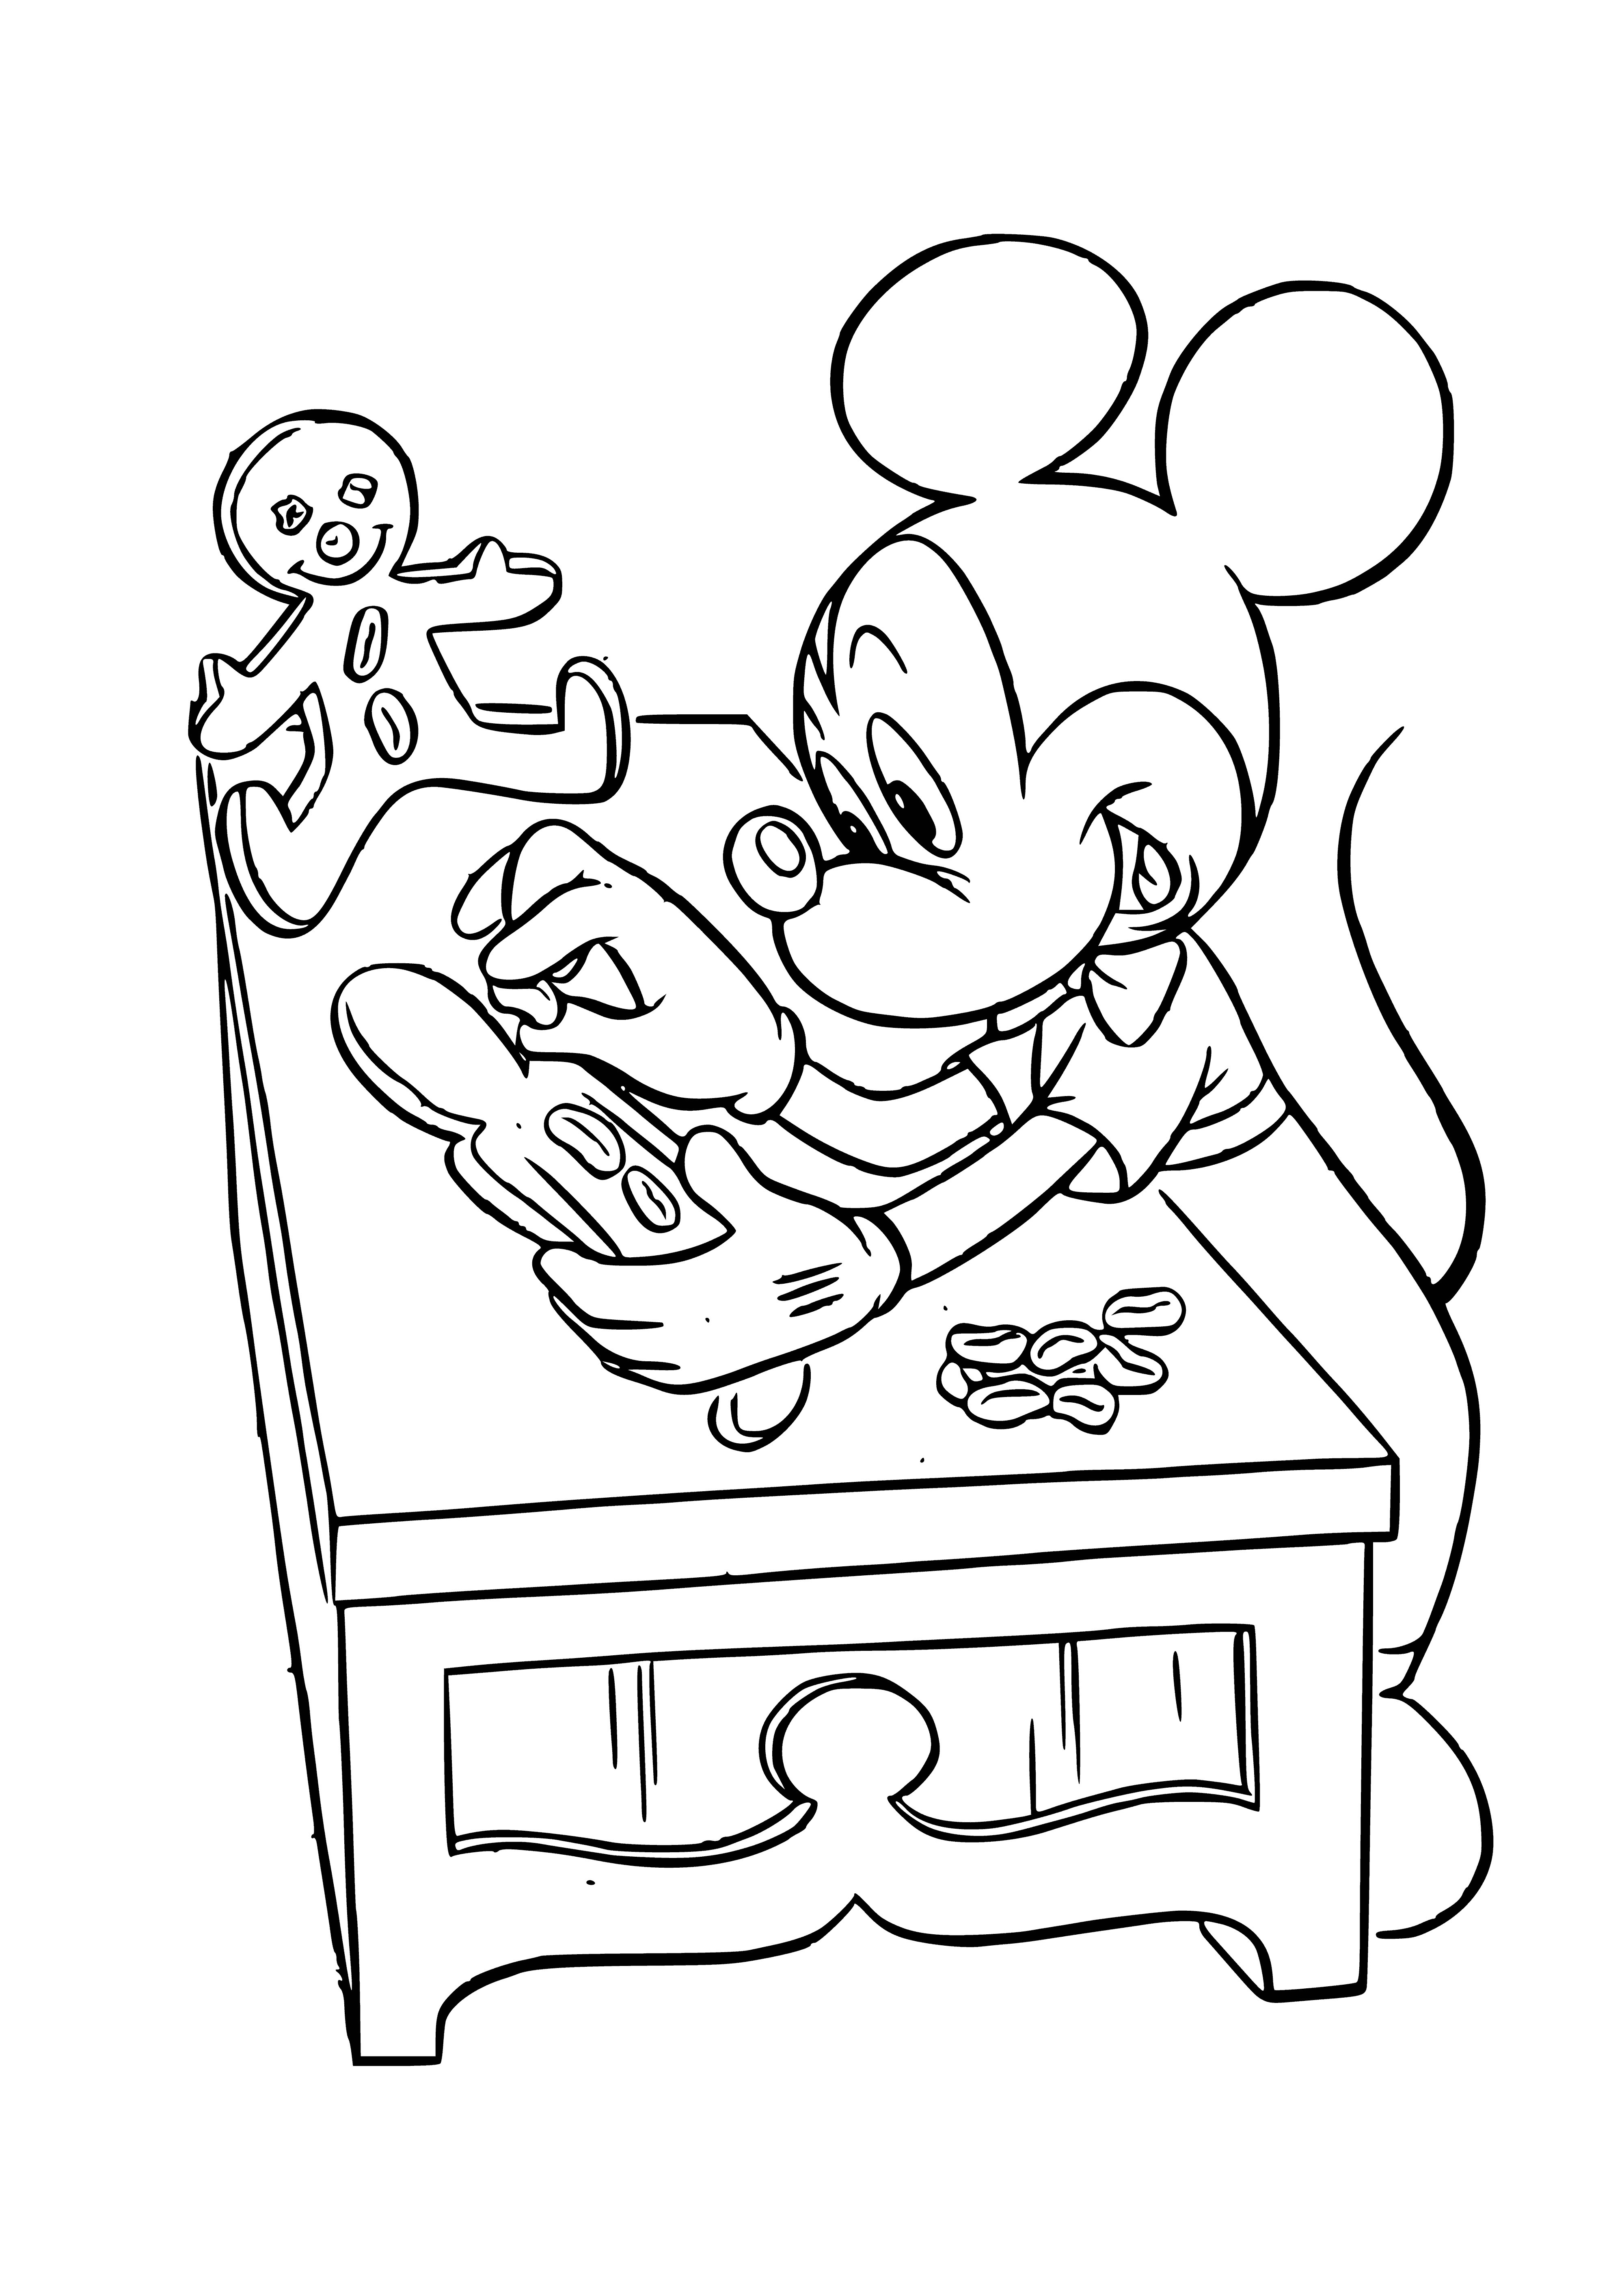 coloring page: Friends with Mickey Mouse are in a kitchen holding bowls of decorated cookies: Mickey ears, bow ties, & buttons!